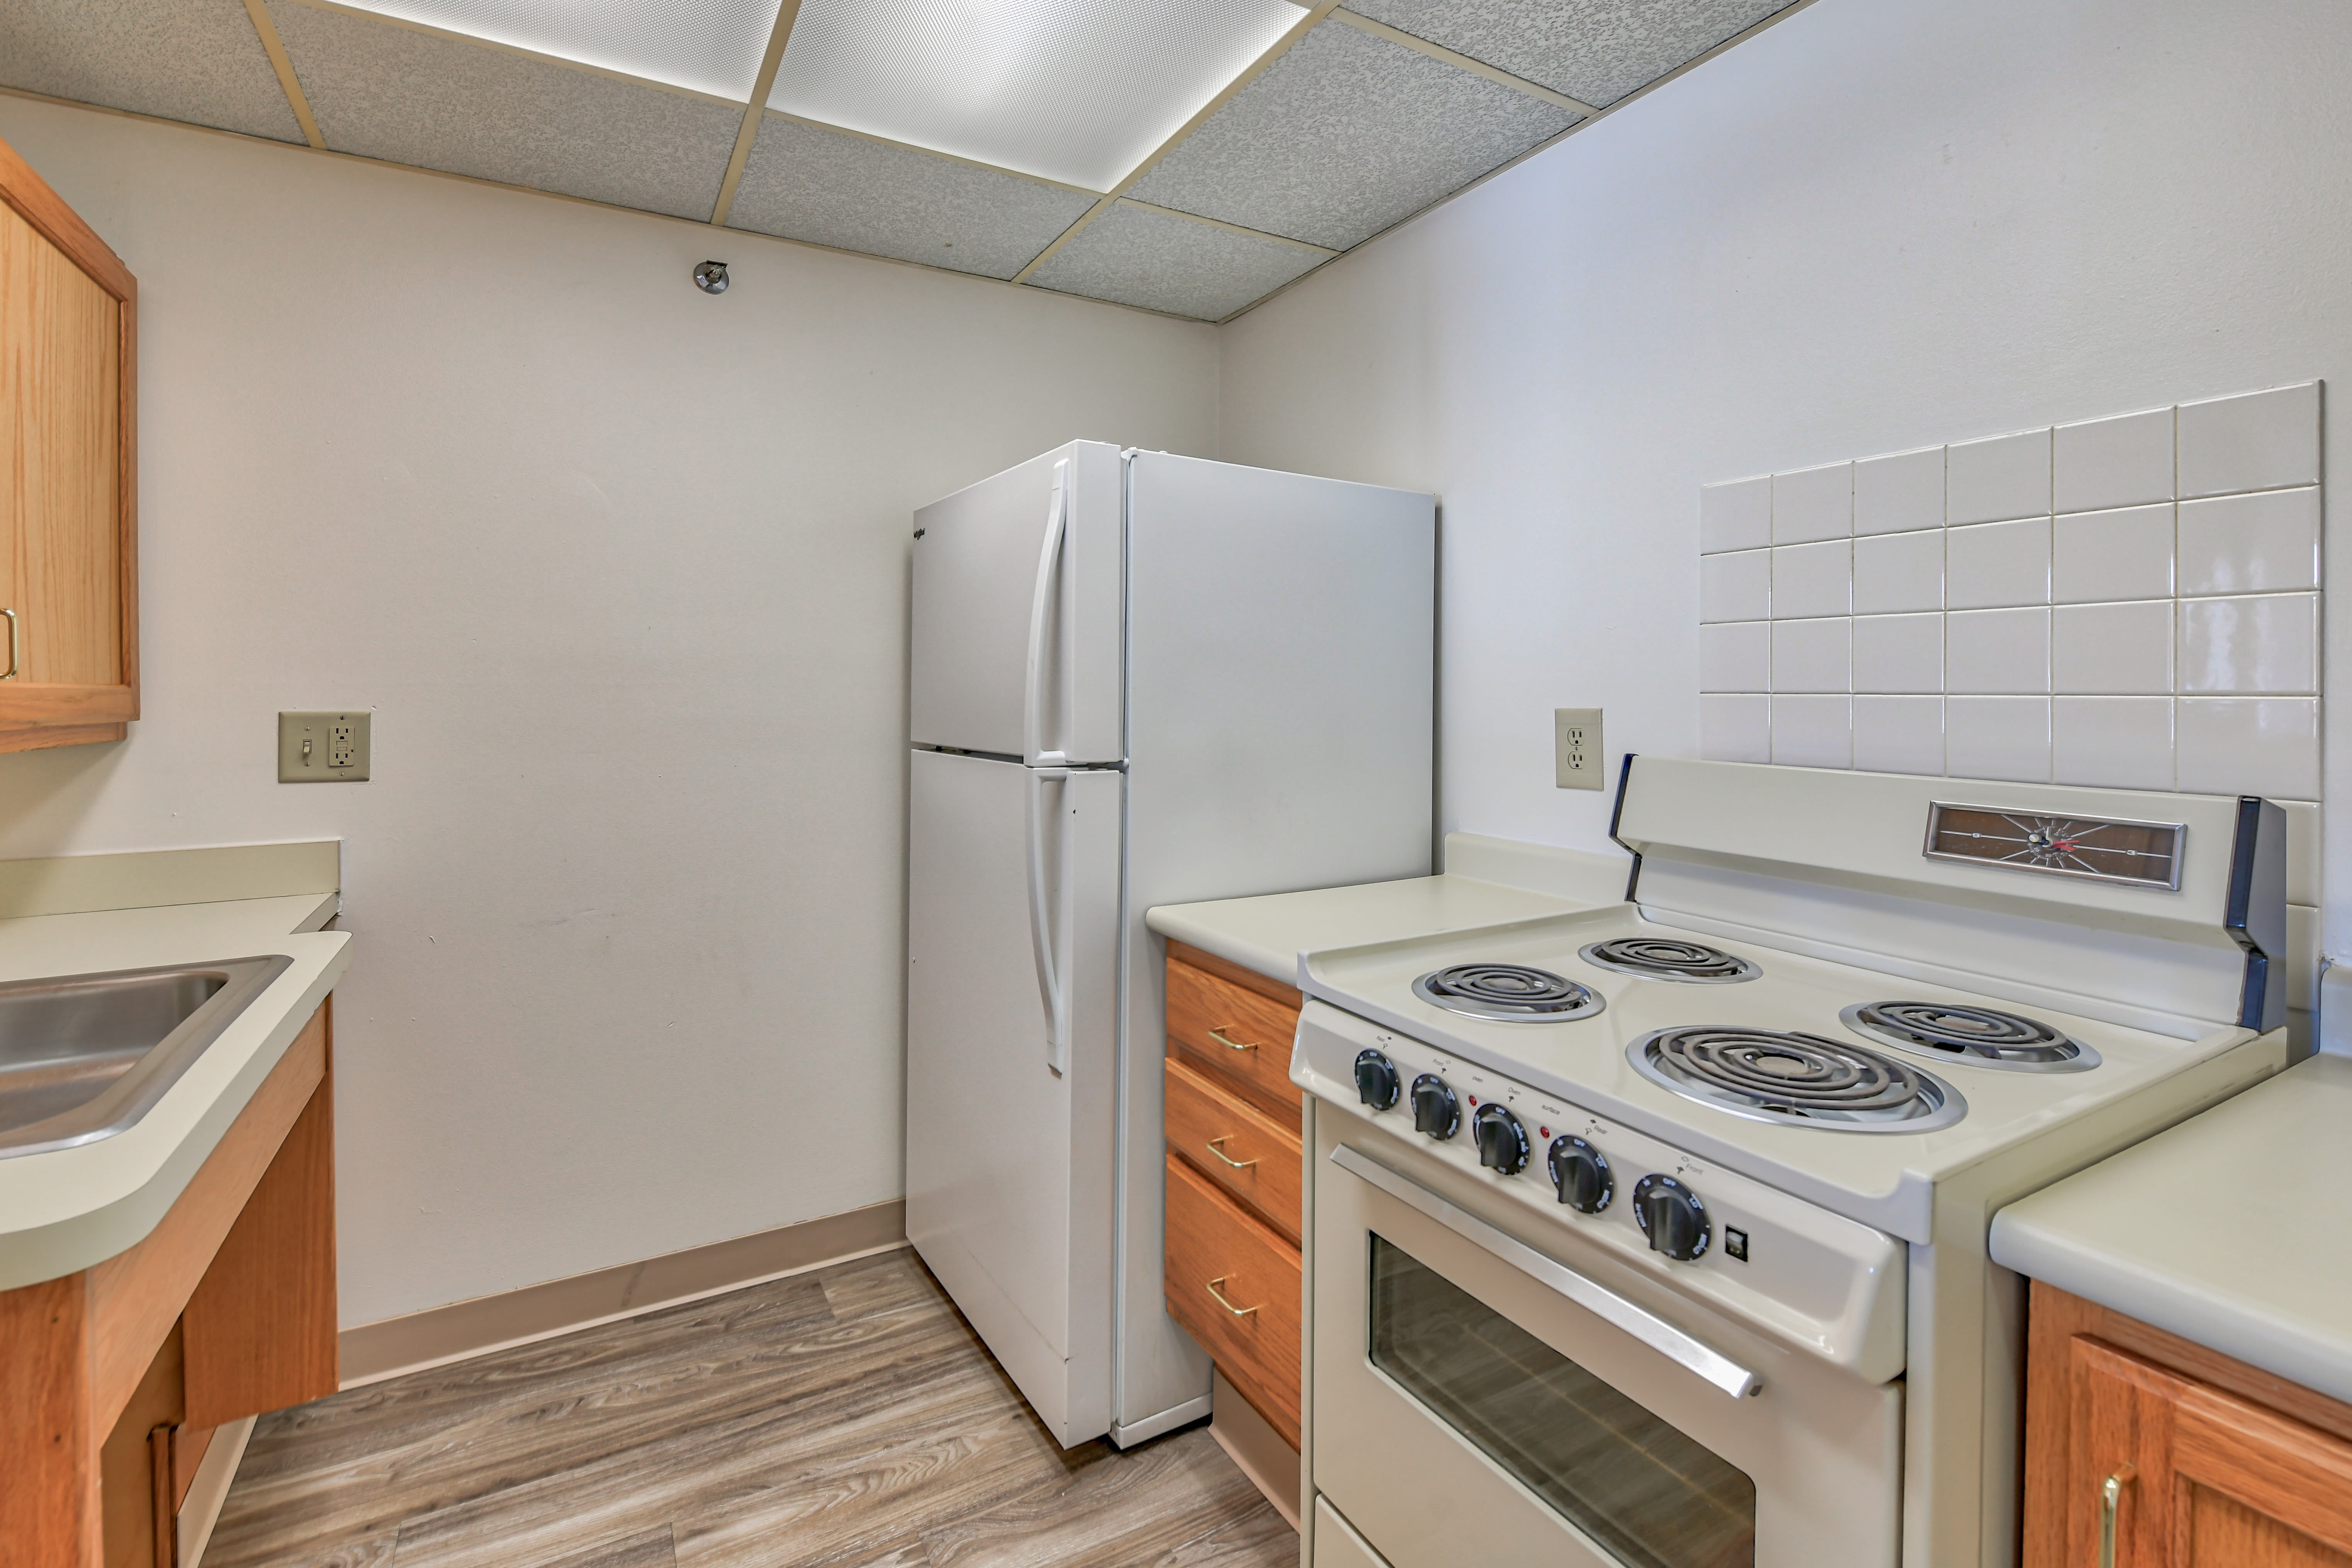 Fully equipped kitchen with garbage disposal at Citizen's Plaza in New Kensington, Pennsylvania